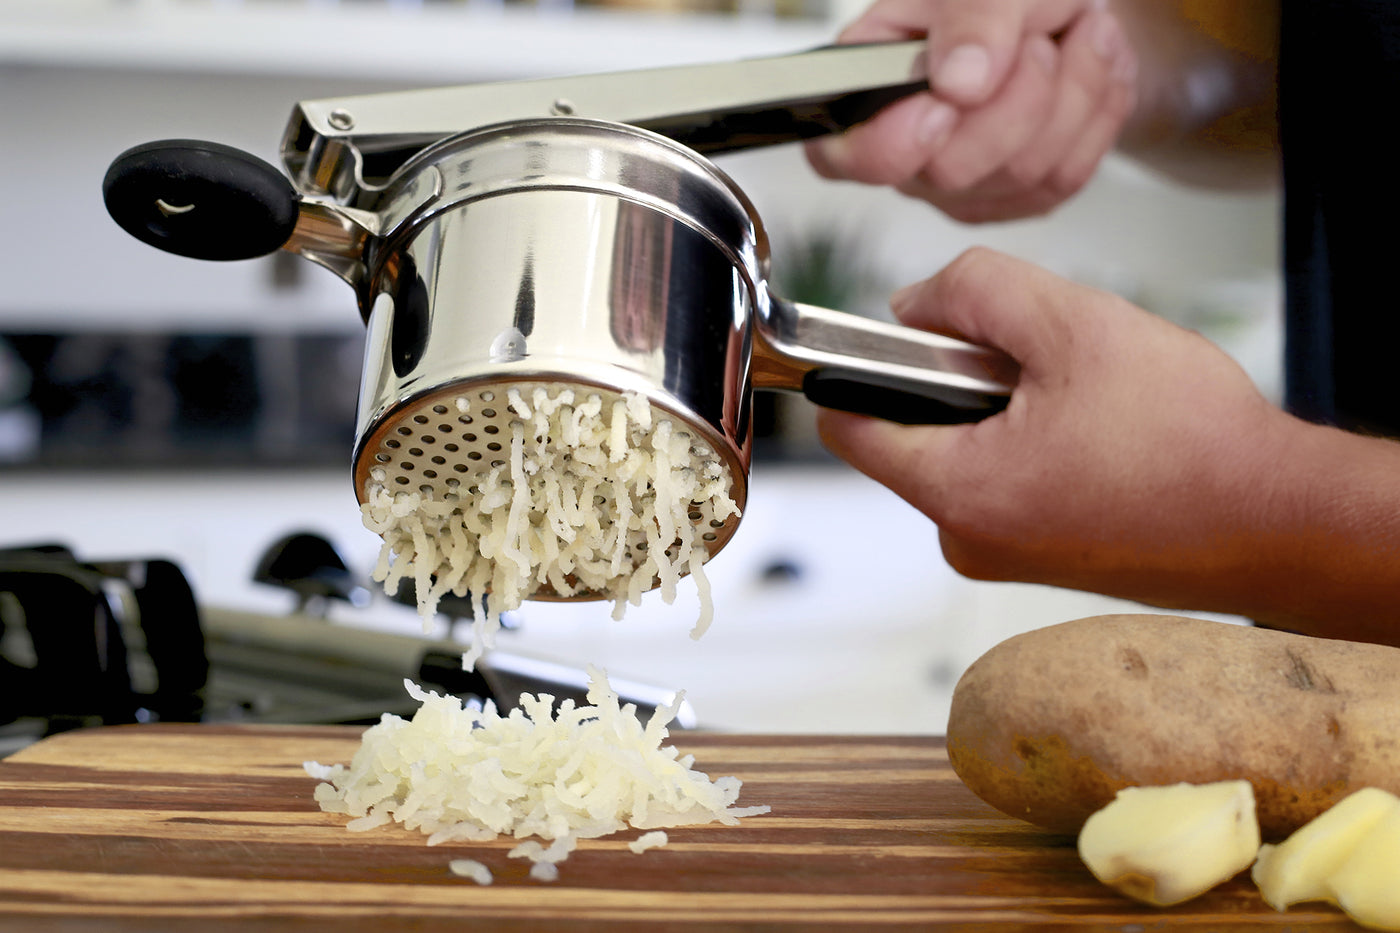 Priority Chef Tools & Gadgets in Kitchen & Dining 